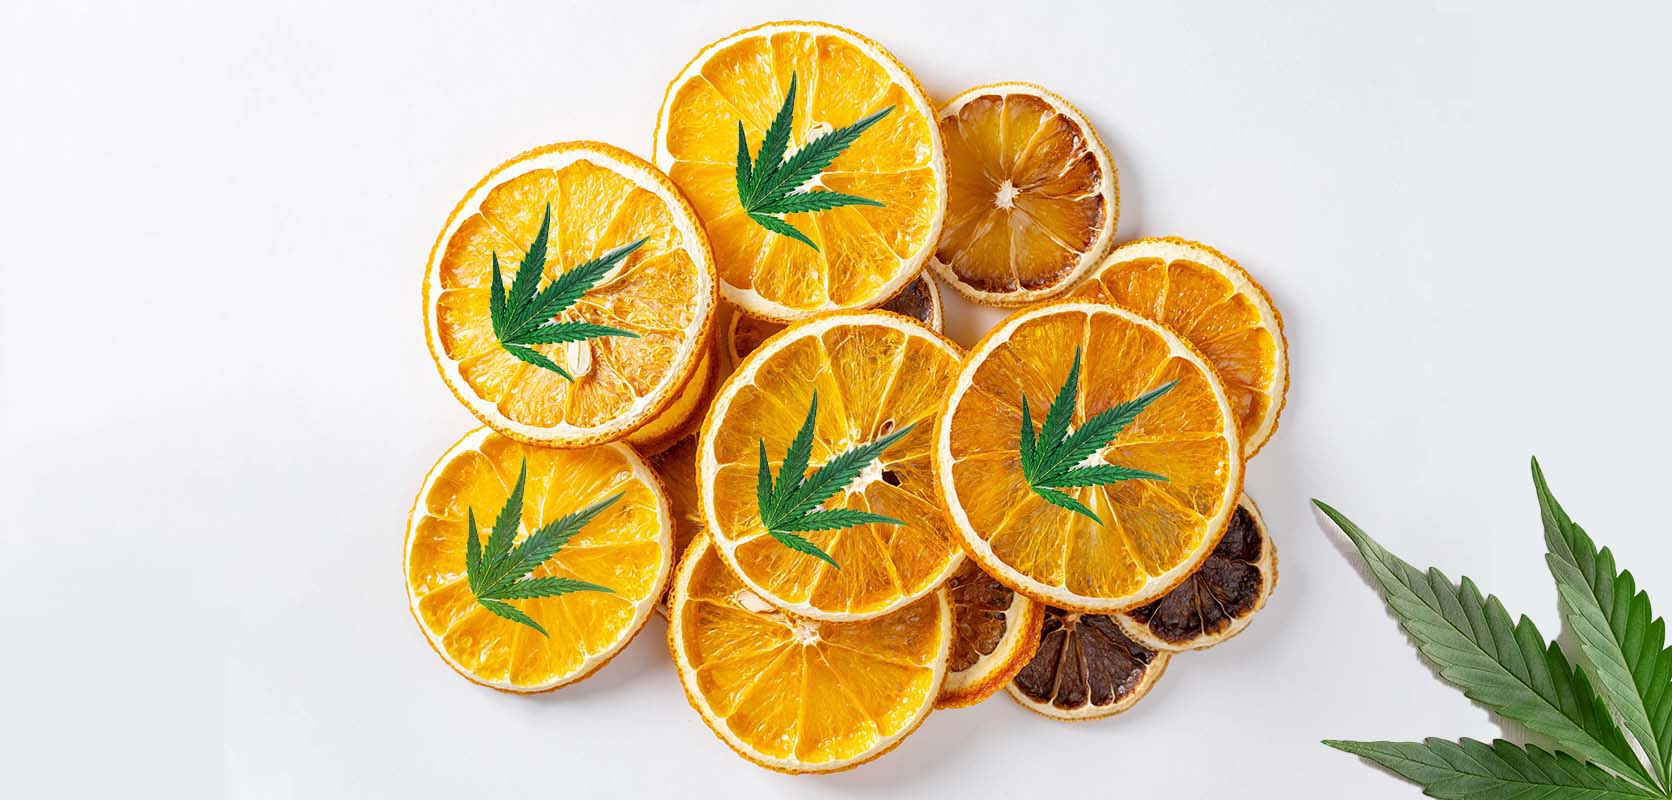 Orange slices with cannabis leaves. weed delivery canada. bc cannabis stores. sativa strains. 